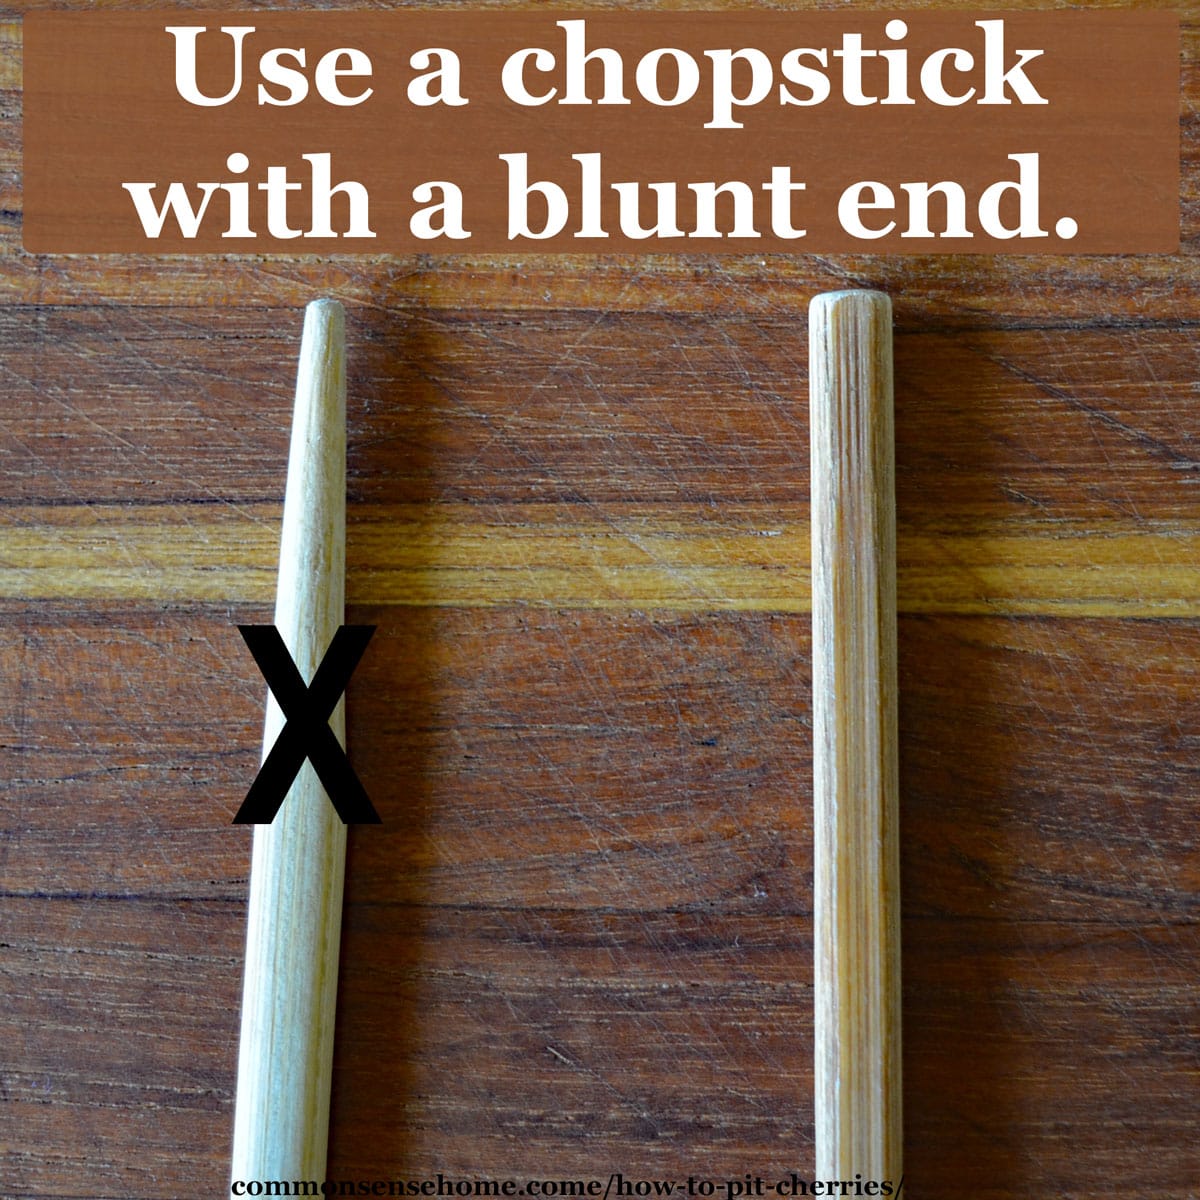 Use a chopstick with a blunt tip.